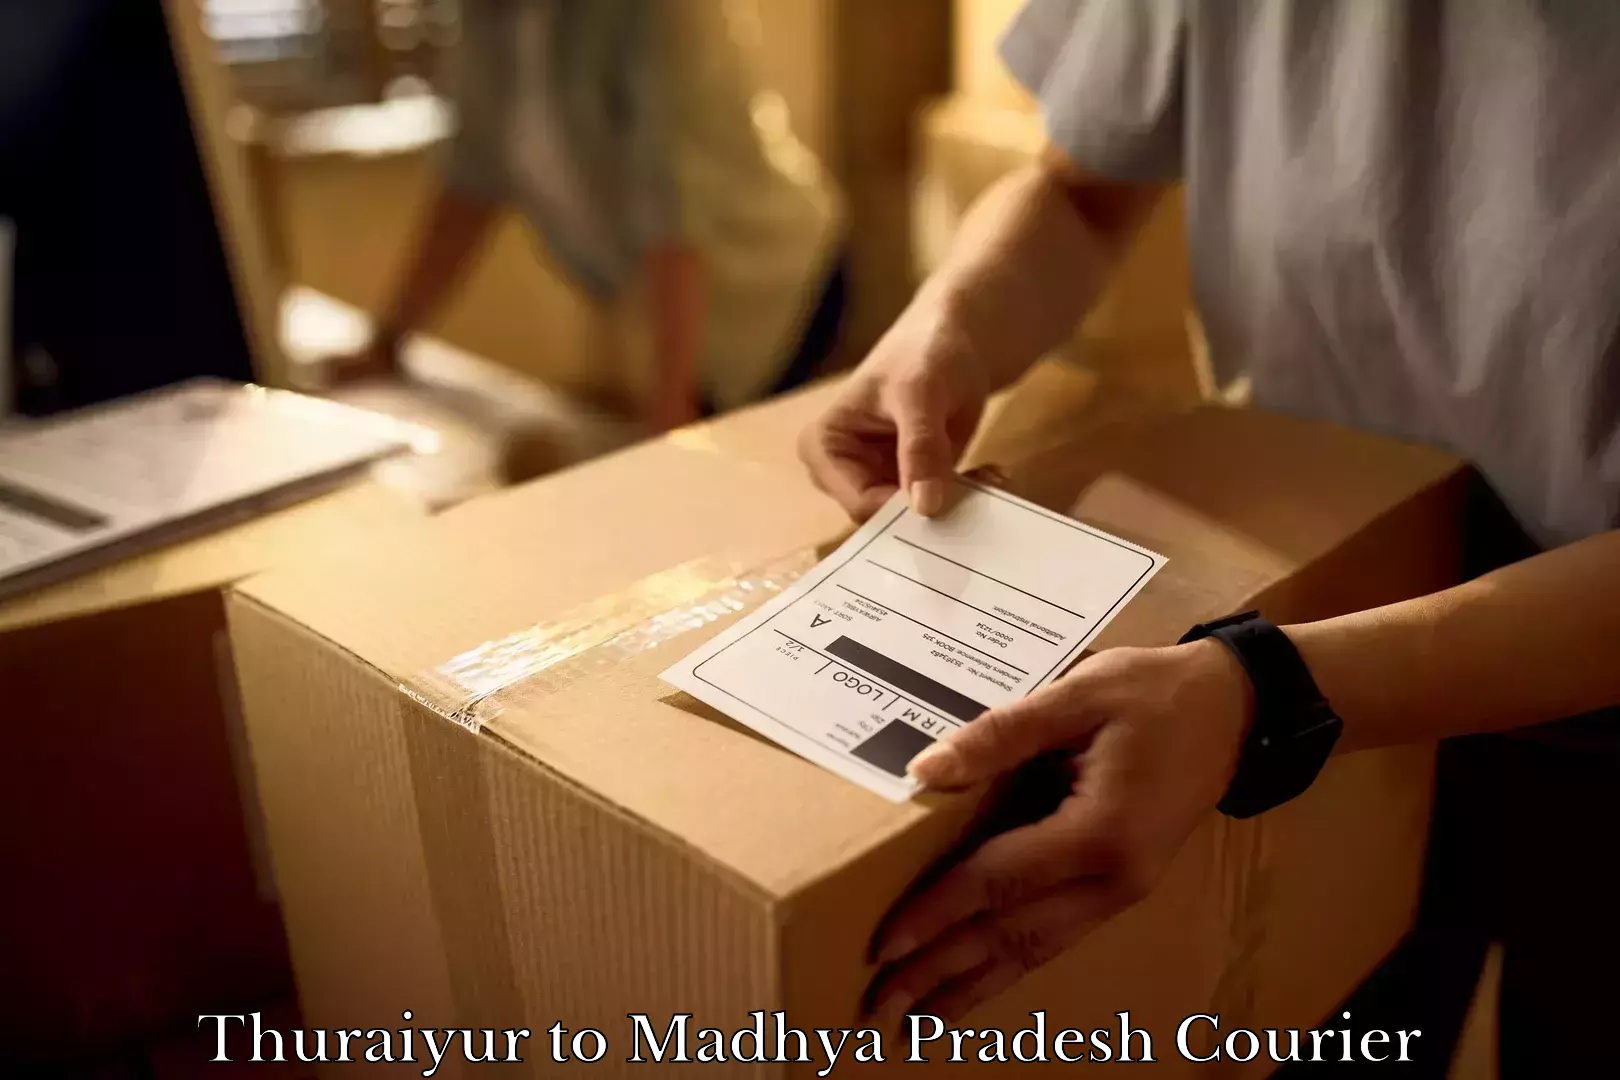 Furniture moving assistance Thuraiyur to Chhatarpur